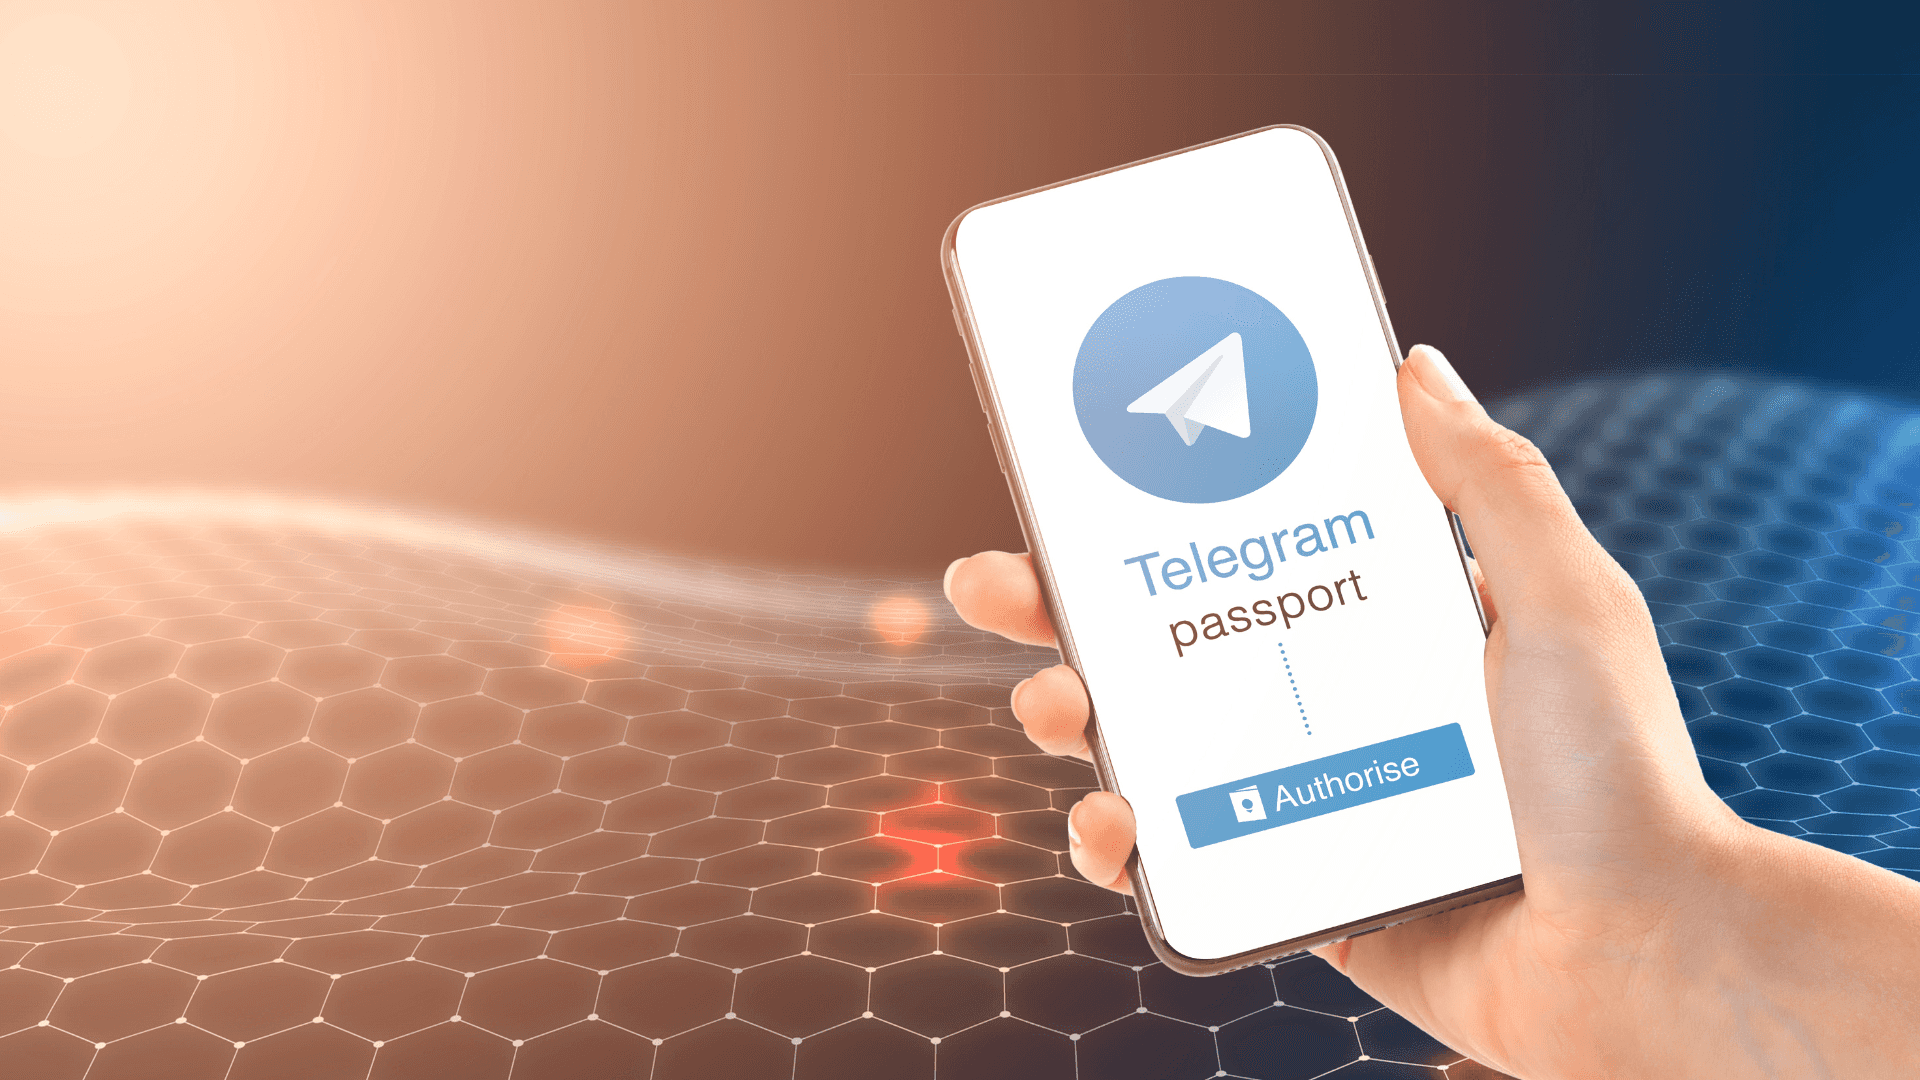 A Hand Holding A Smartphone With A Telegram App On It